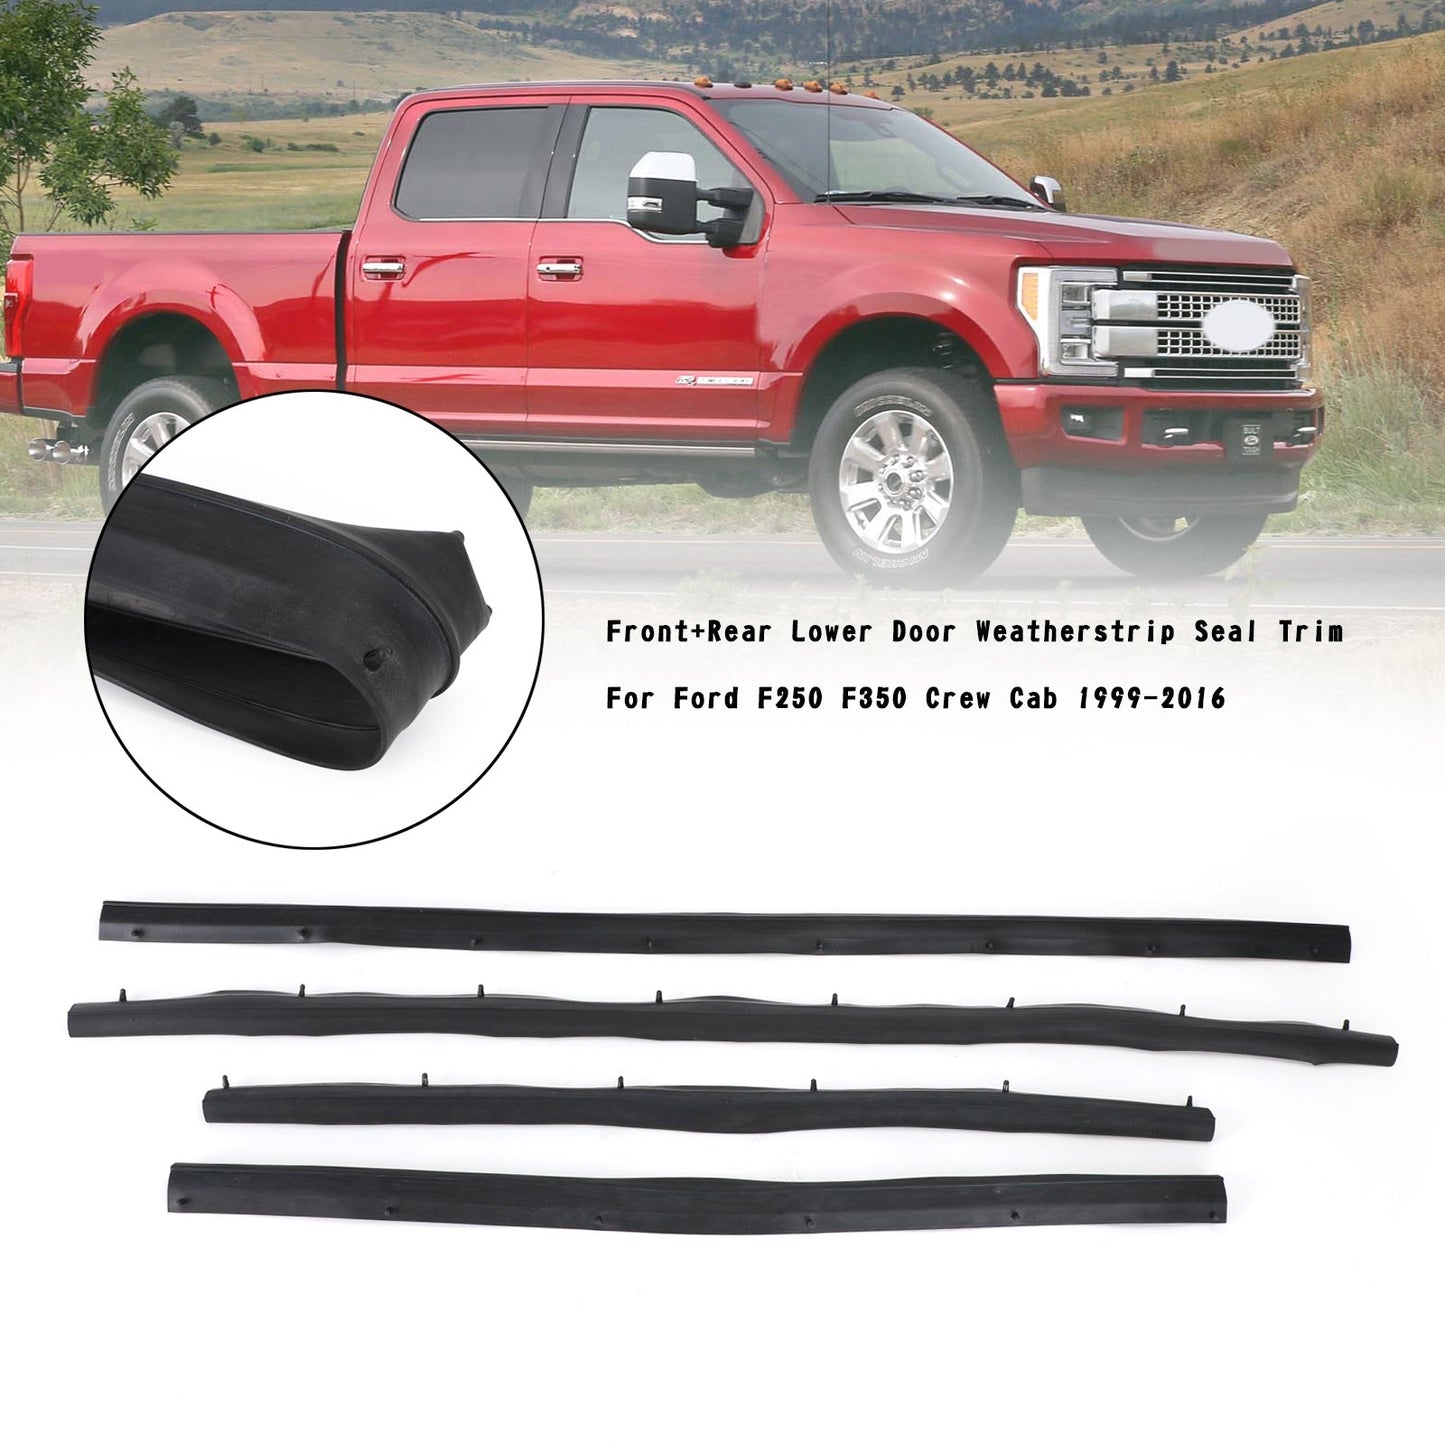 Front+Rear Lower Door Weather Strip Seal Trim For Ford F250 F350 Crew Cab 99-16